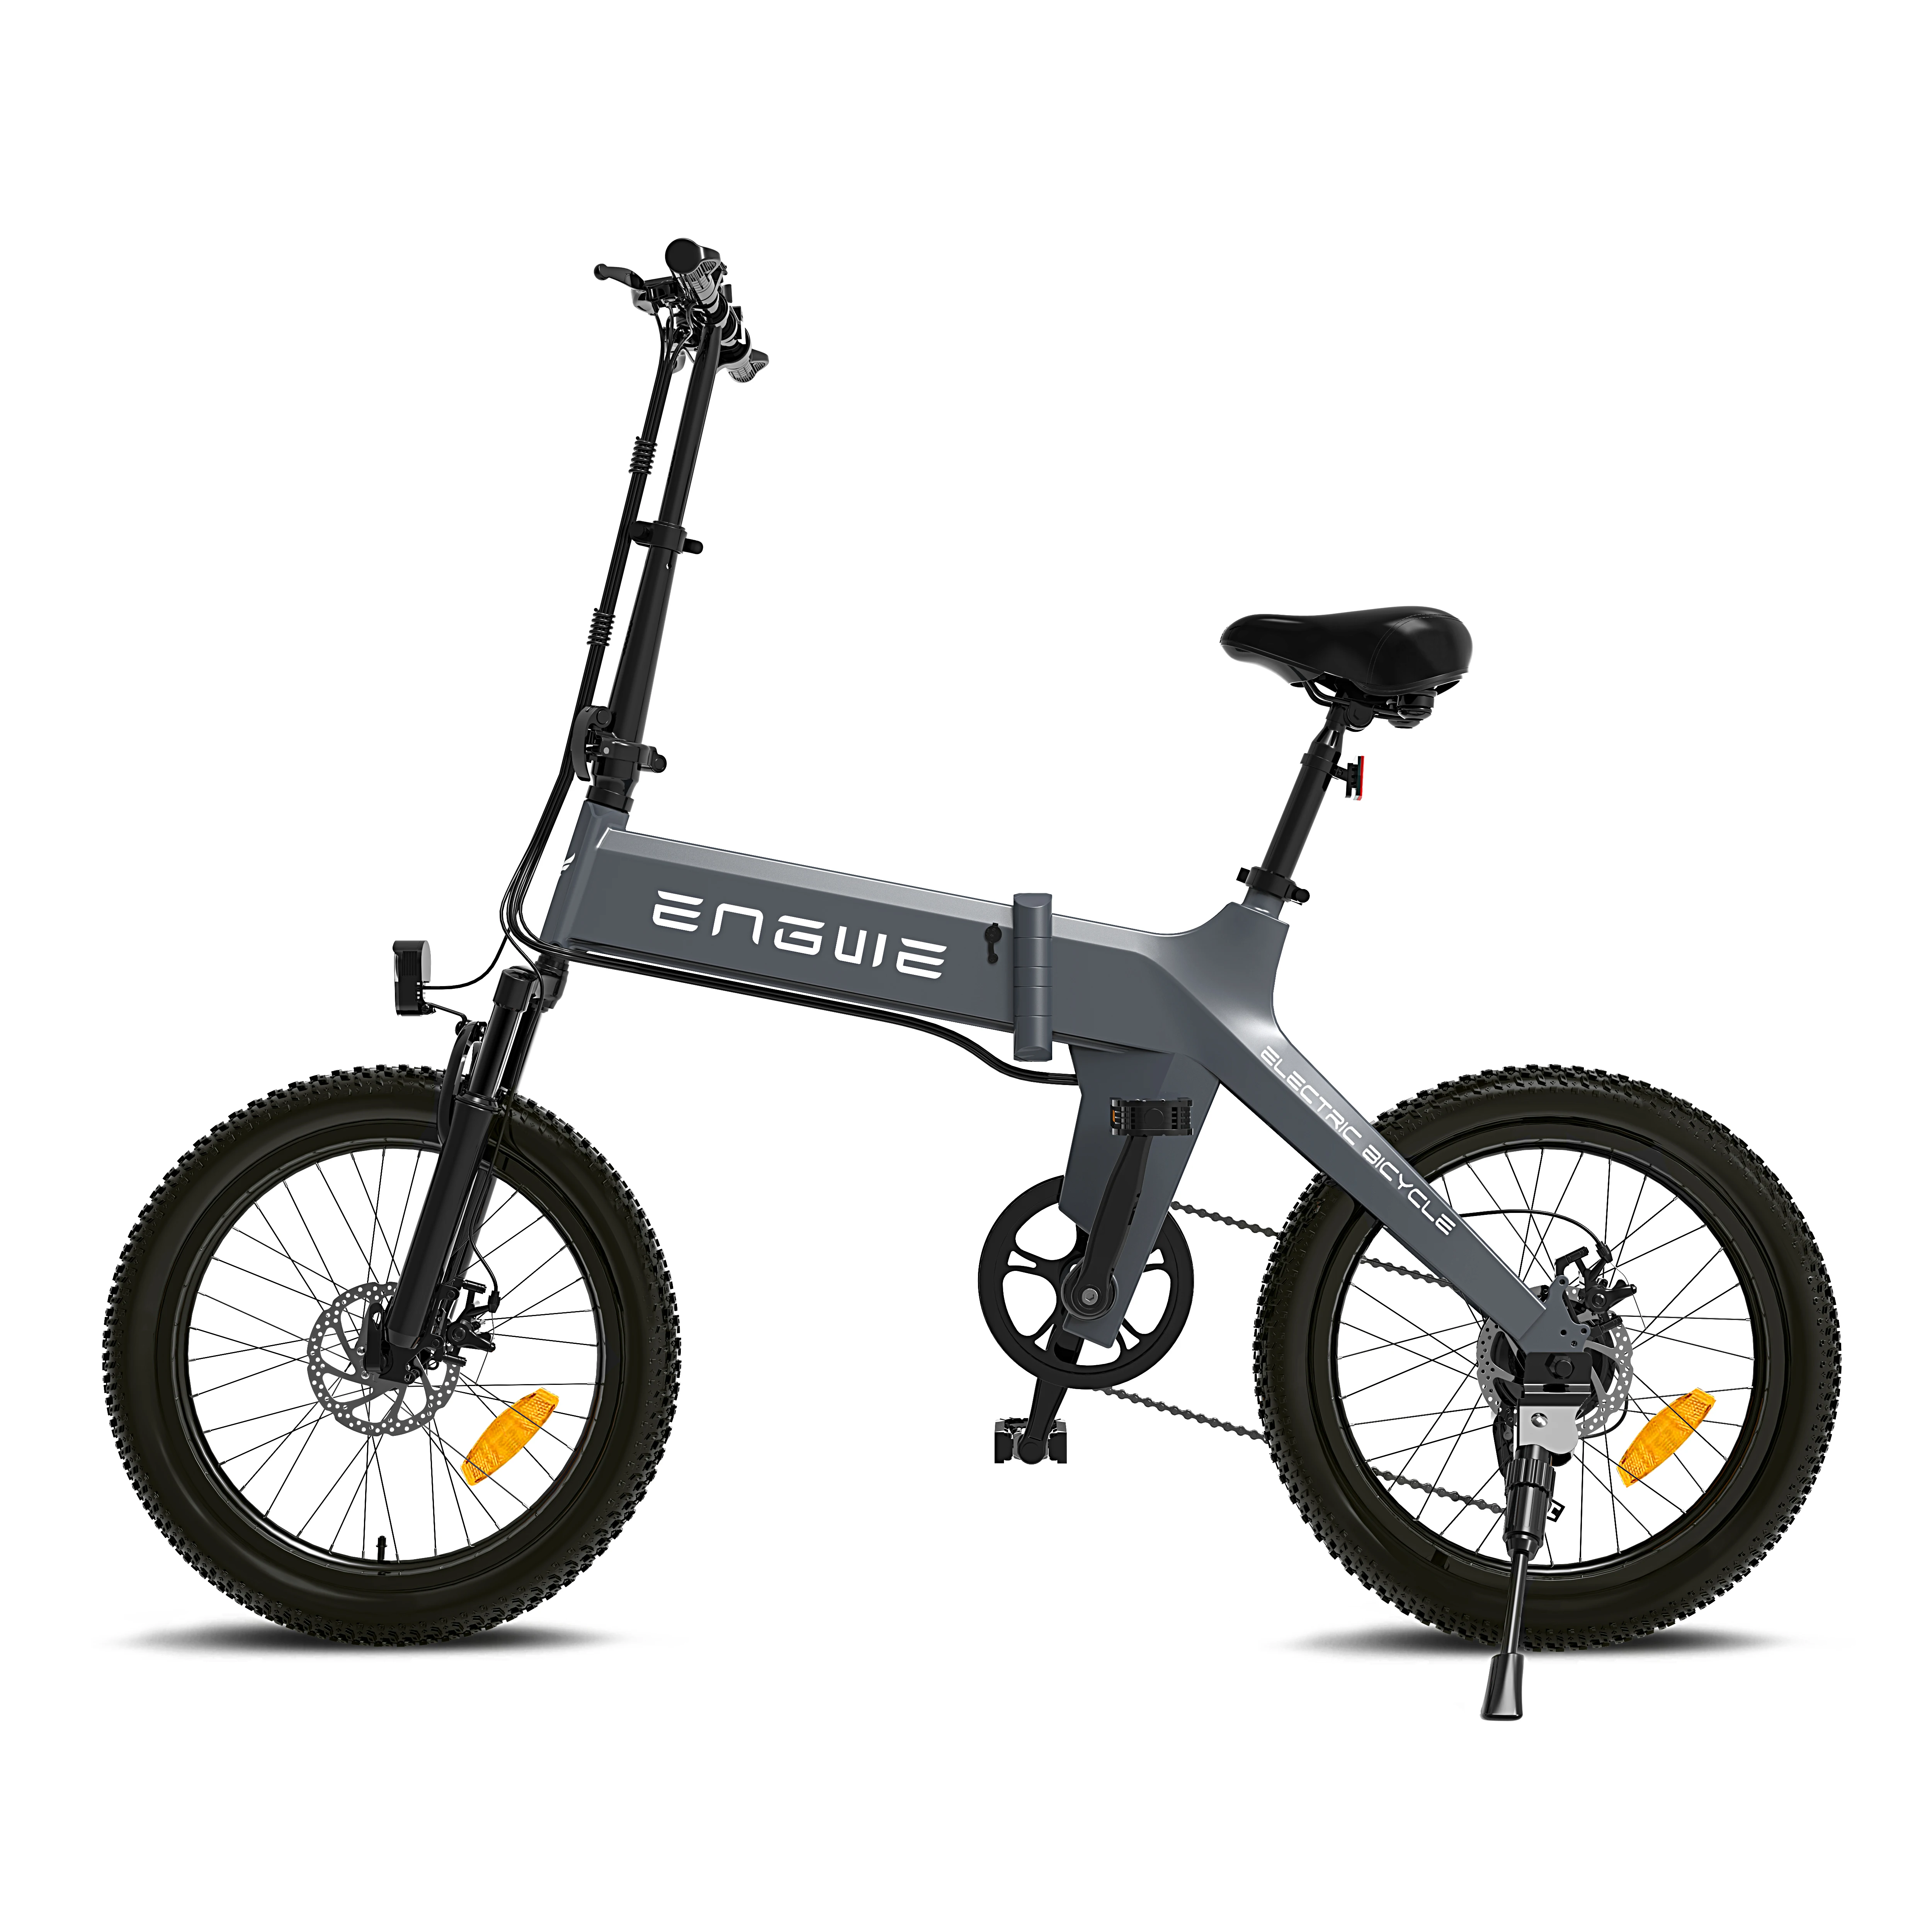 

EU Warehouse Ready to ship outdoor high quality Engwe 250W high-speed brushless motor electric ebike bike bicycle C20 Pro